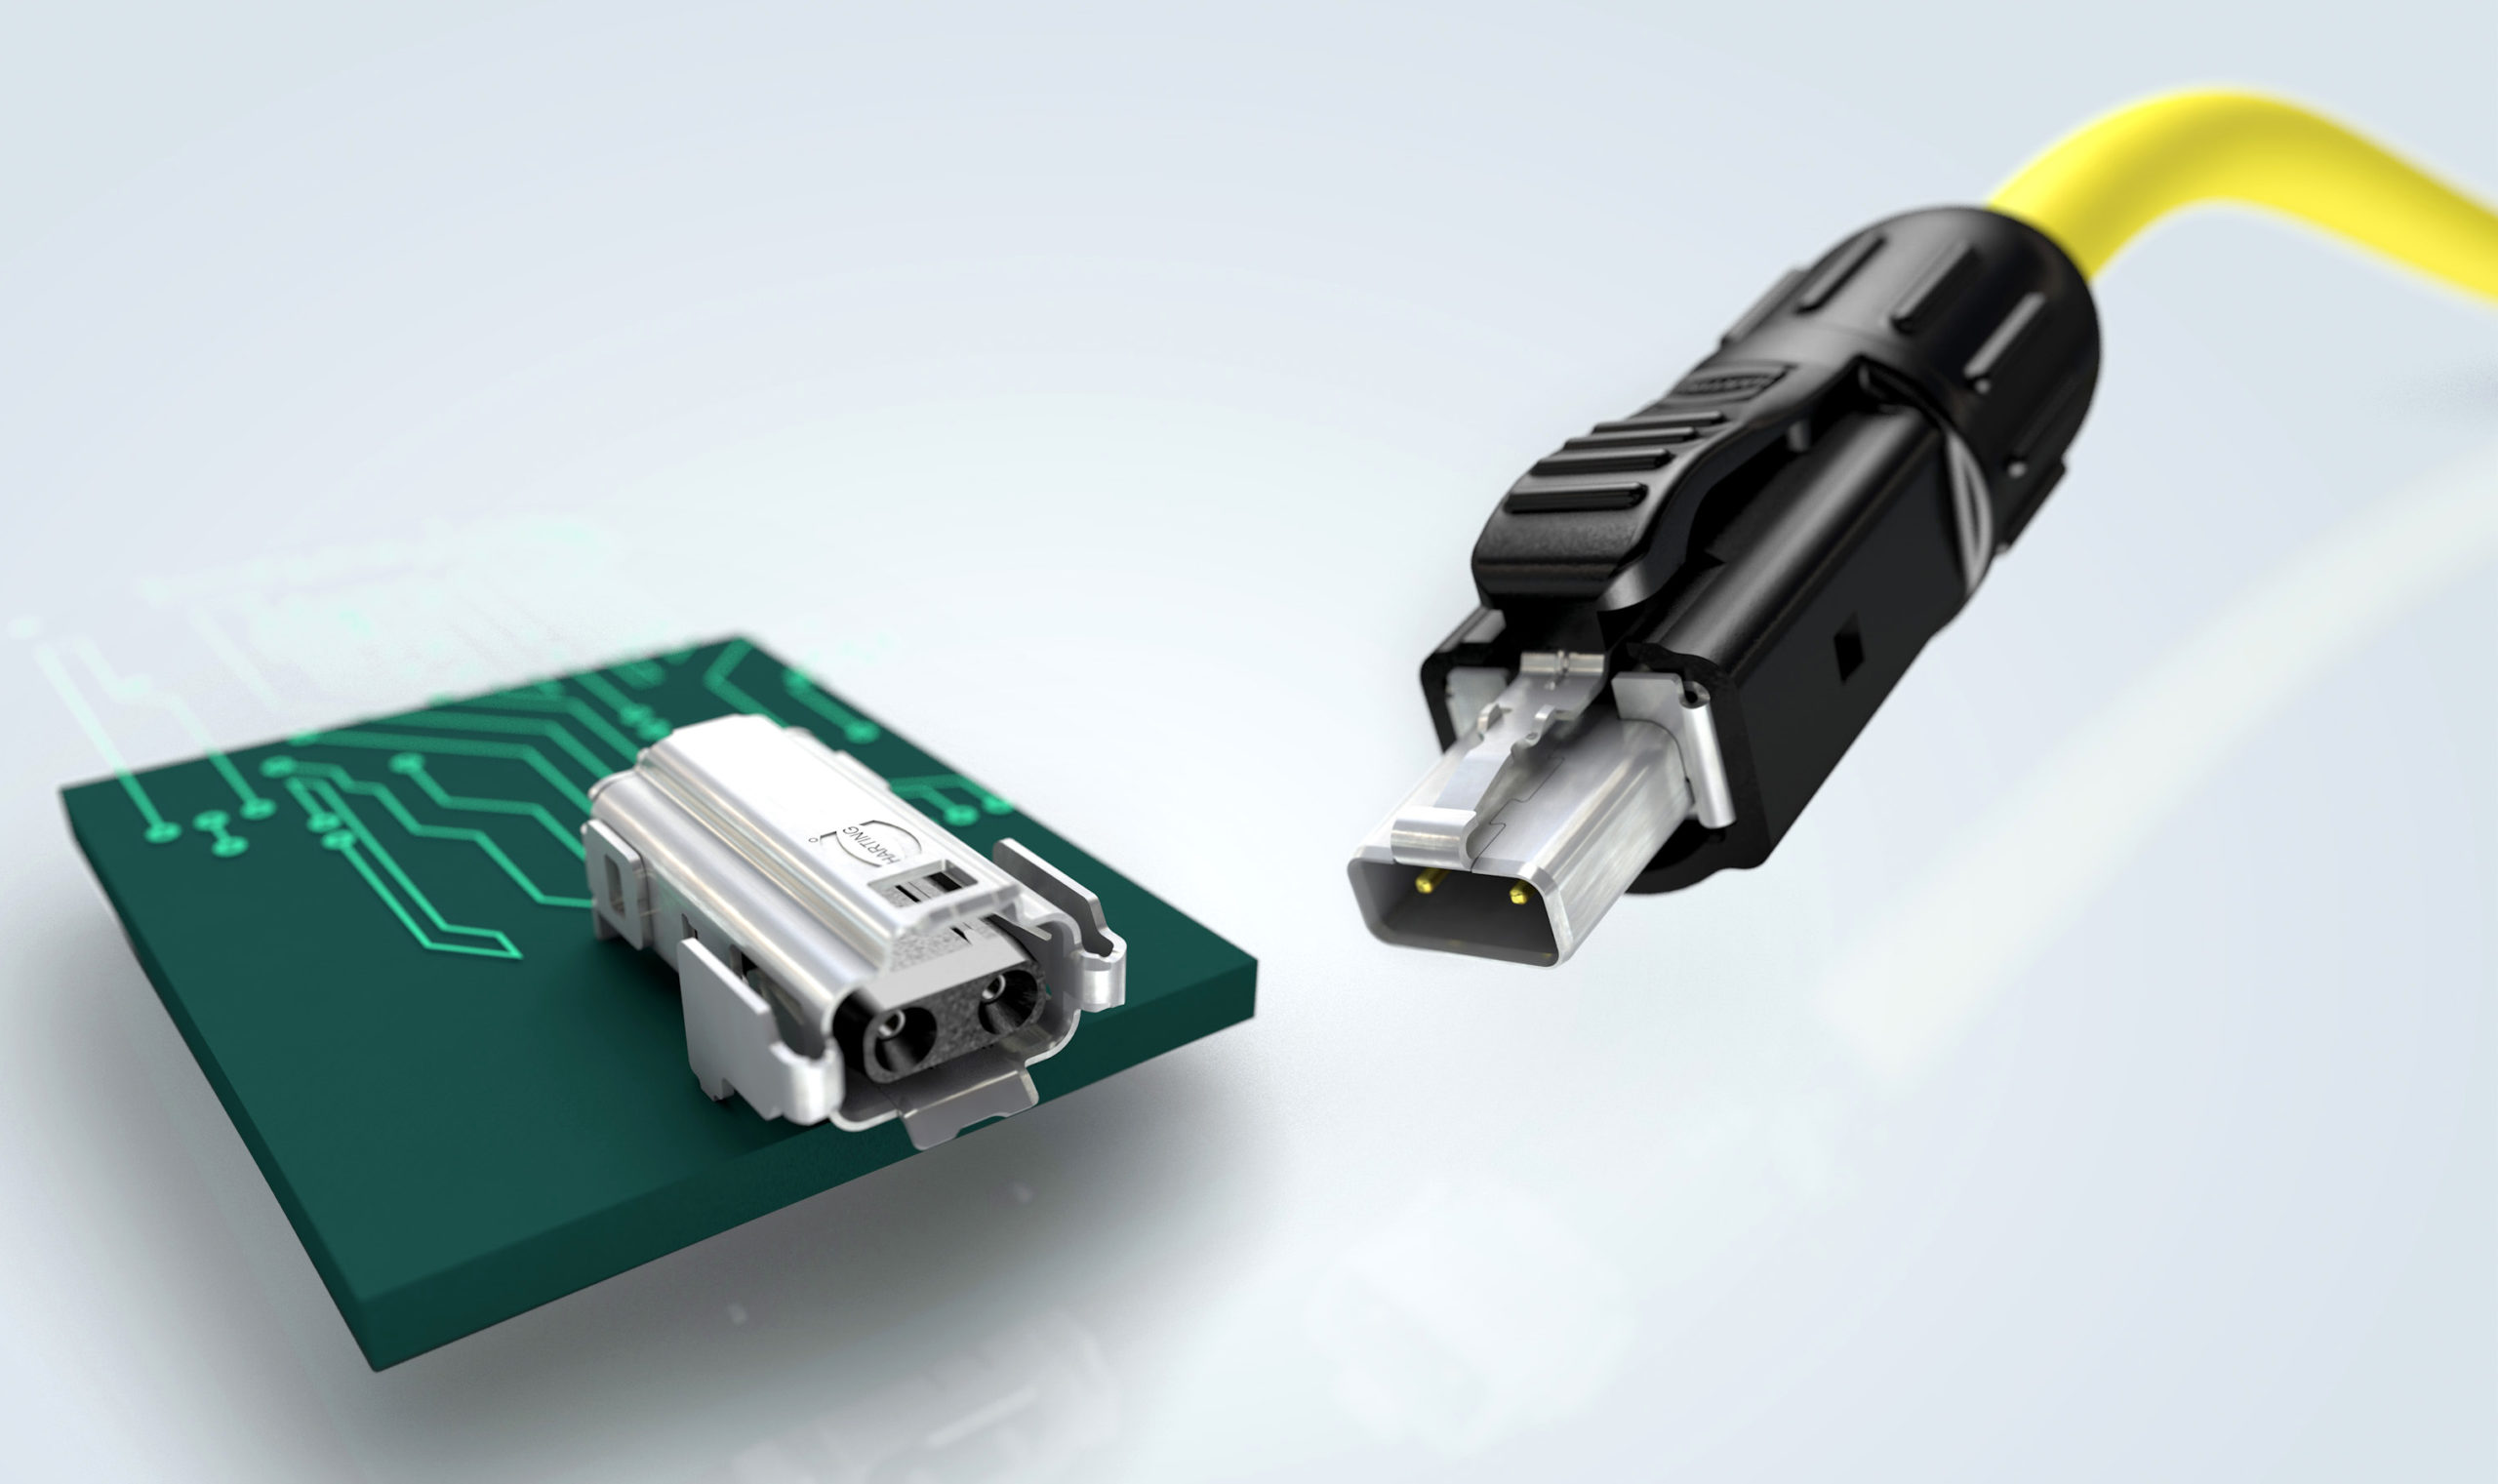 HARTING's T1 Industrial Series single-pair Ethernet connectors